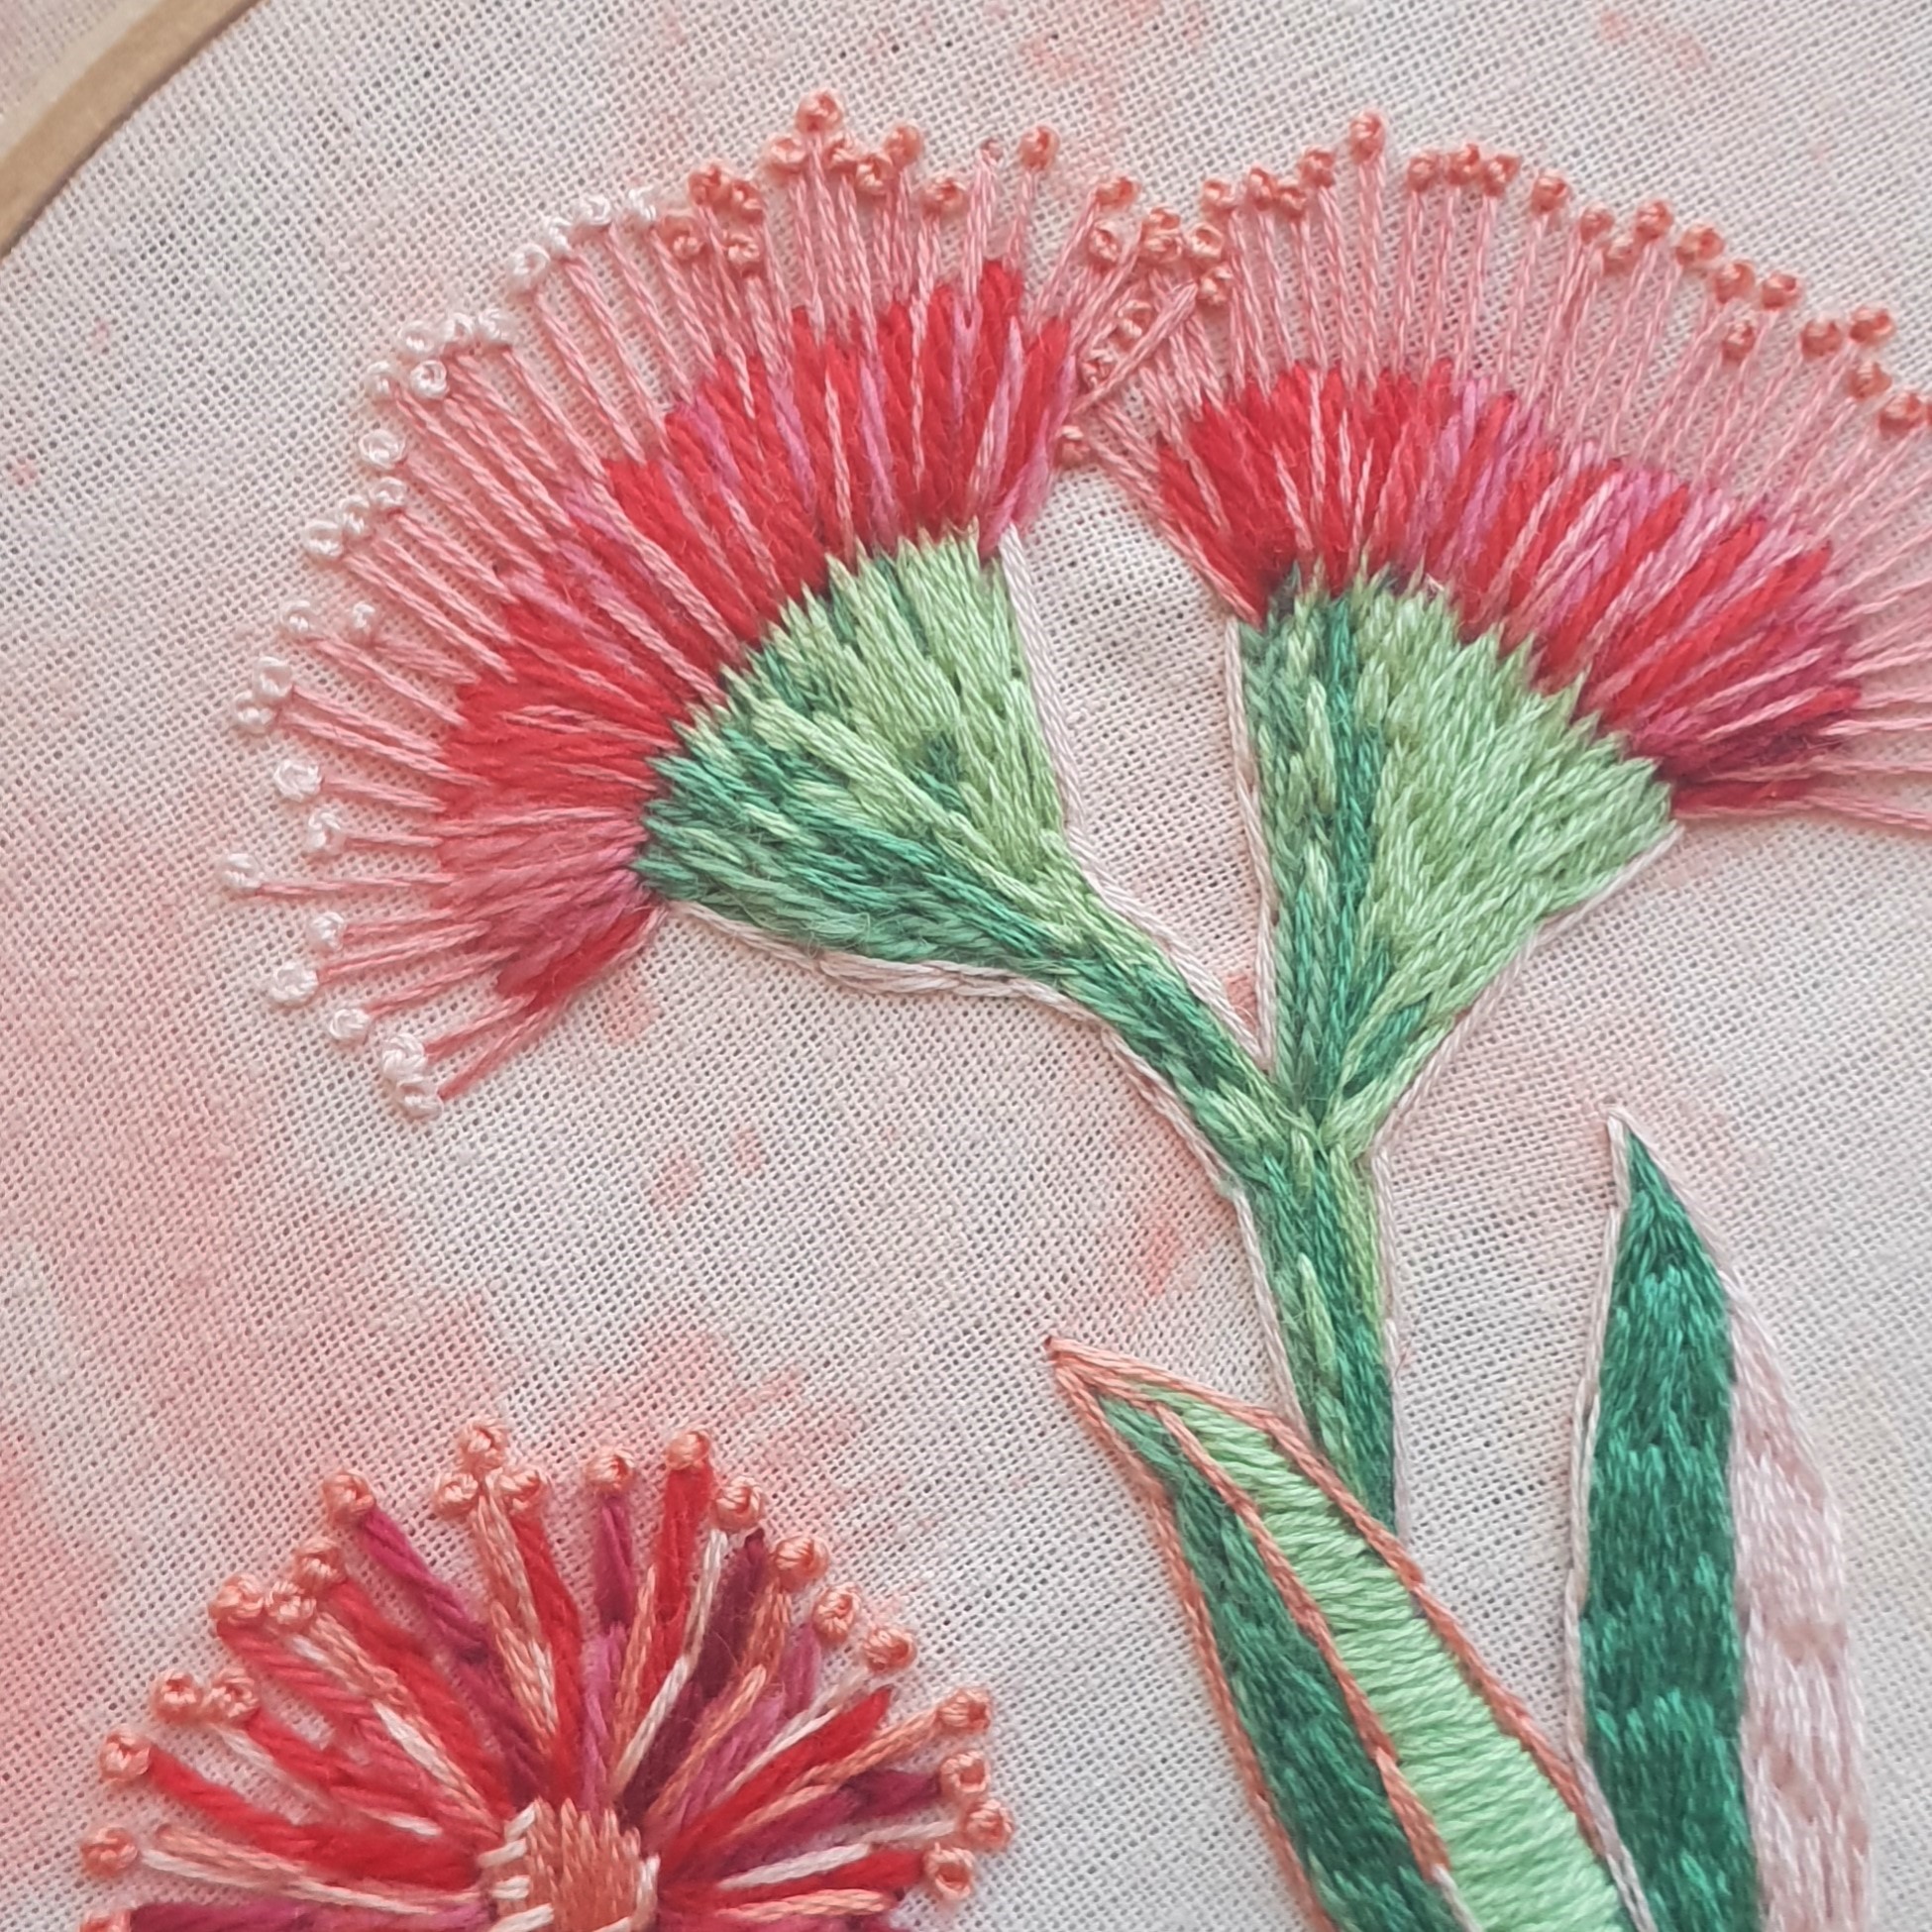 Floral Embroidery Workshop with Fleur Woods